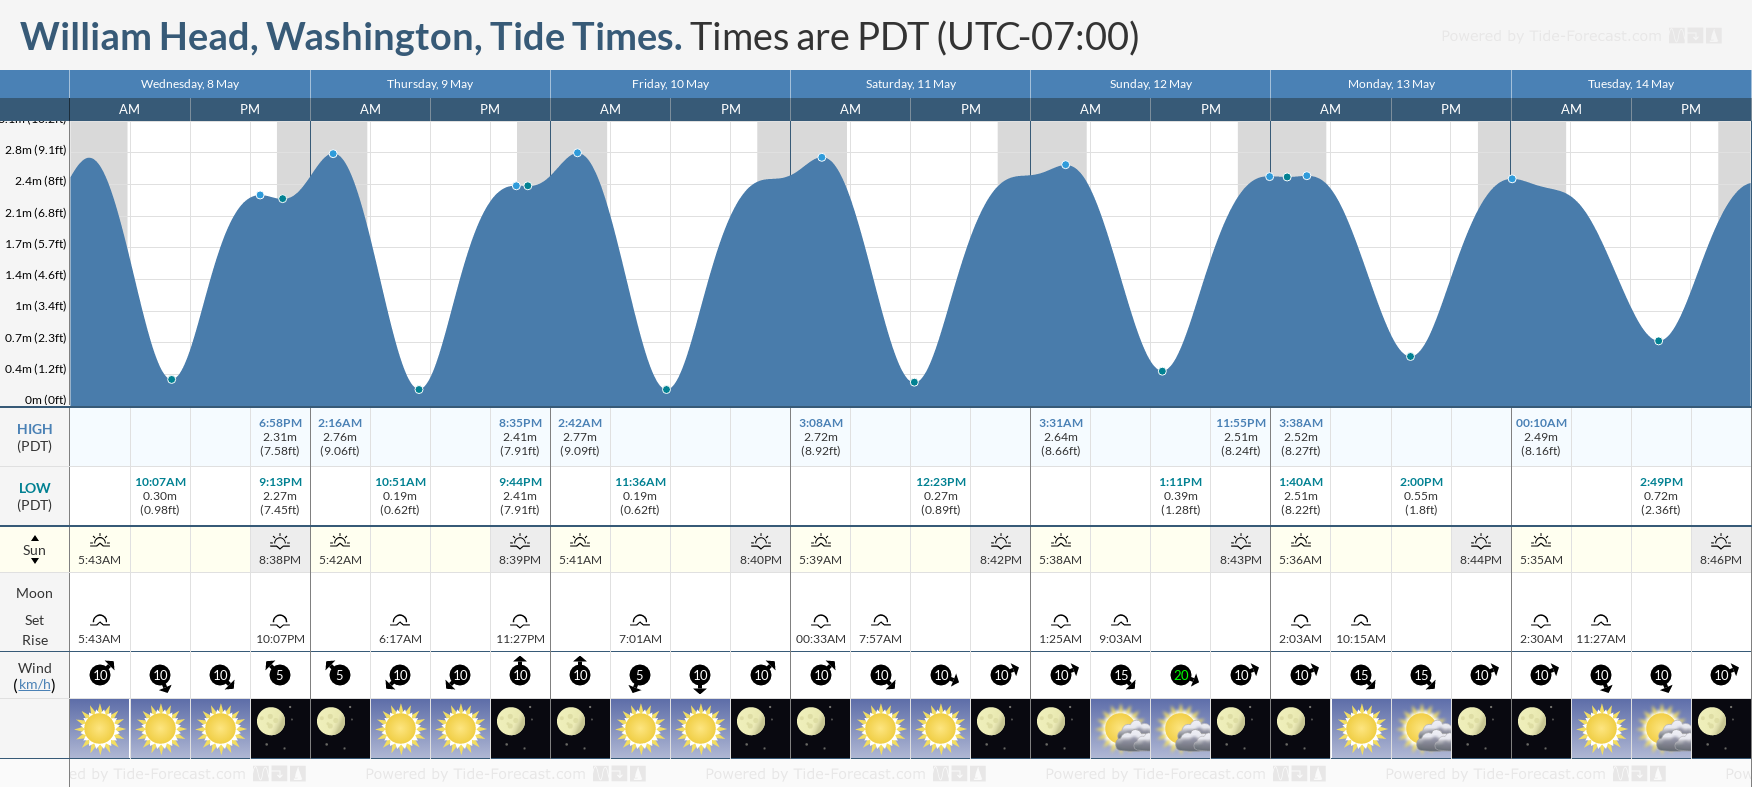 William Head, Washington Tide Chart including high and low tide times for the next 7 days